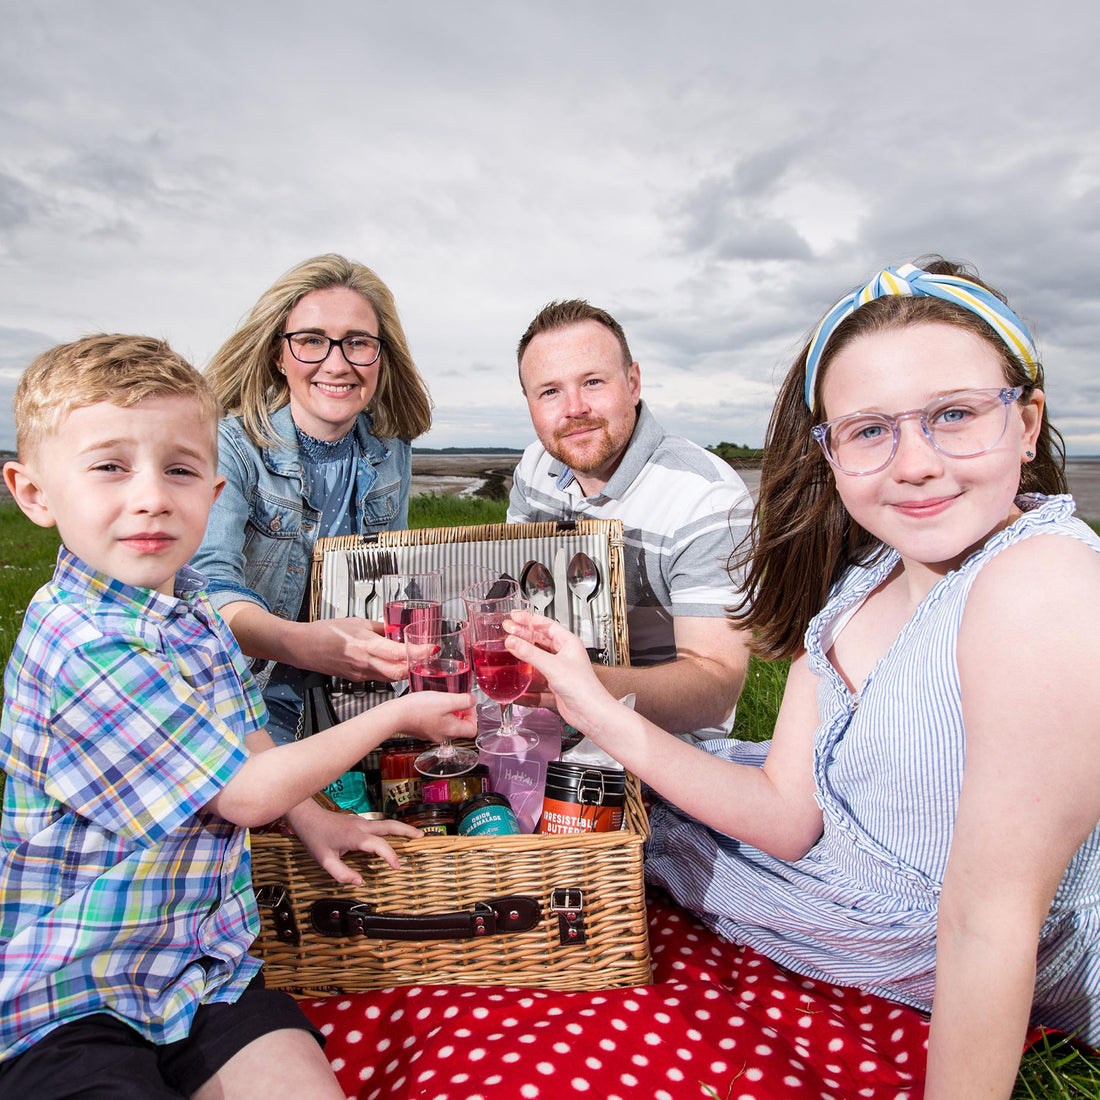 Enjoy a Summer of Food Festival Fun including this weekend's Comber Earlies Food Festival!